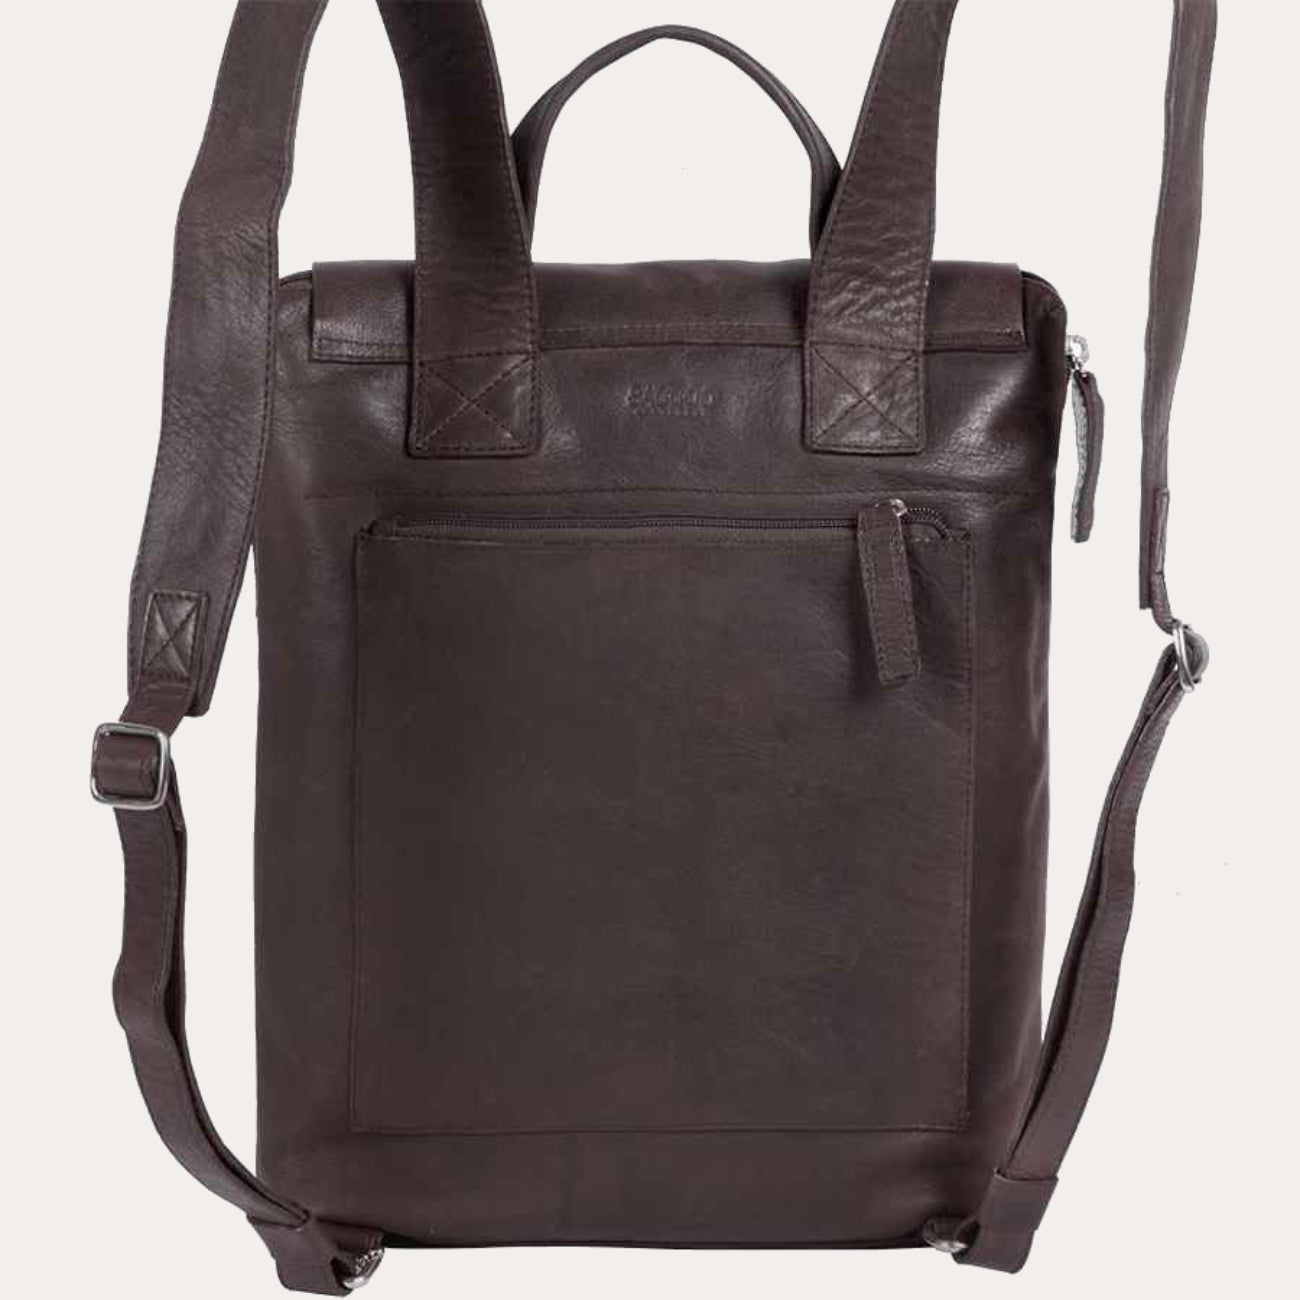 Saccoo Choco Leather Backpack-Small Size